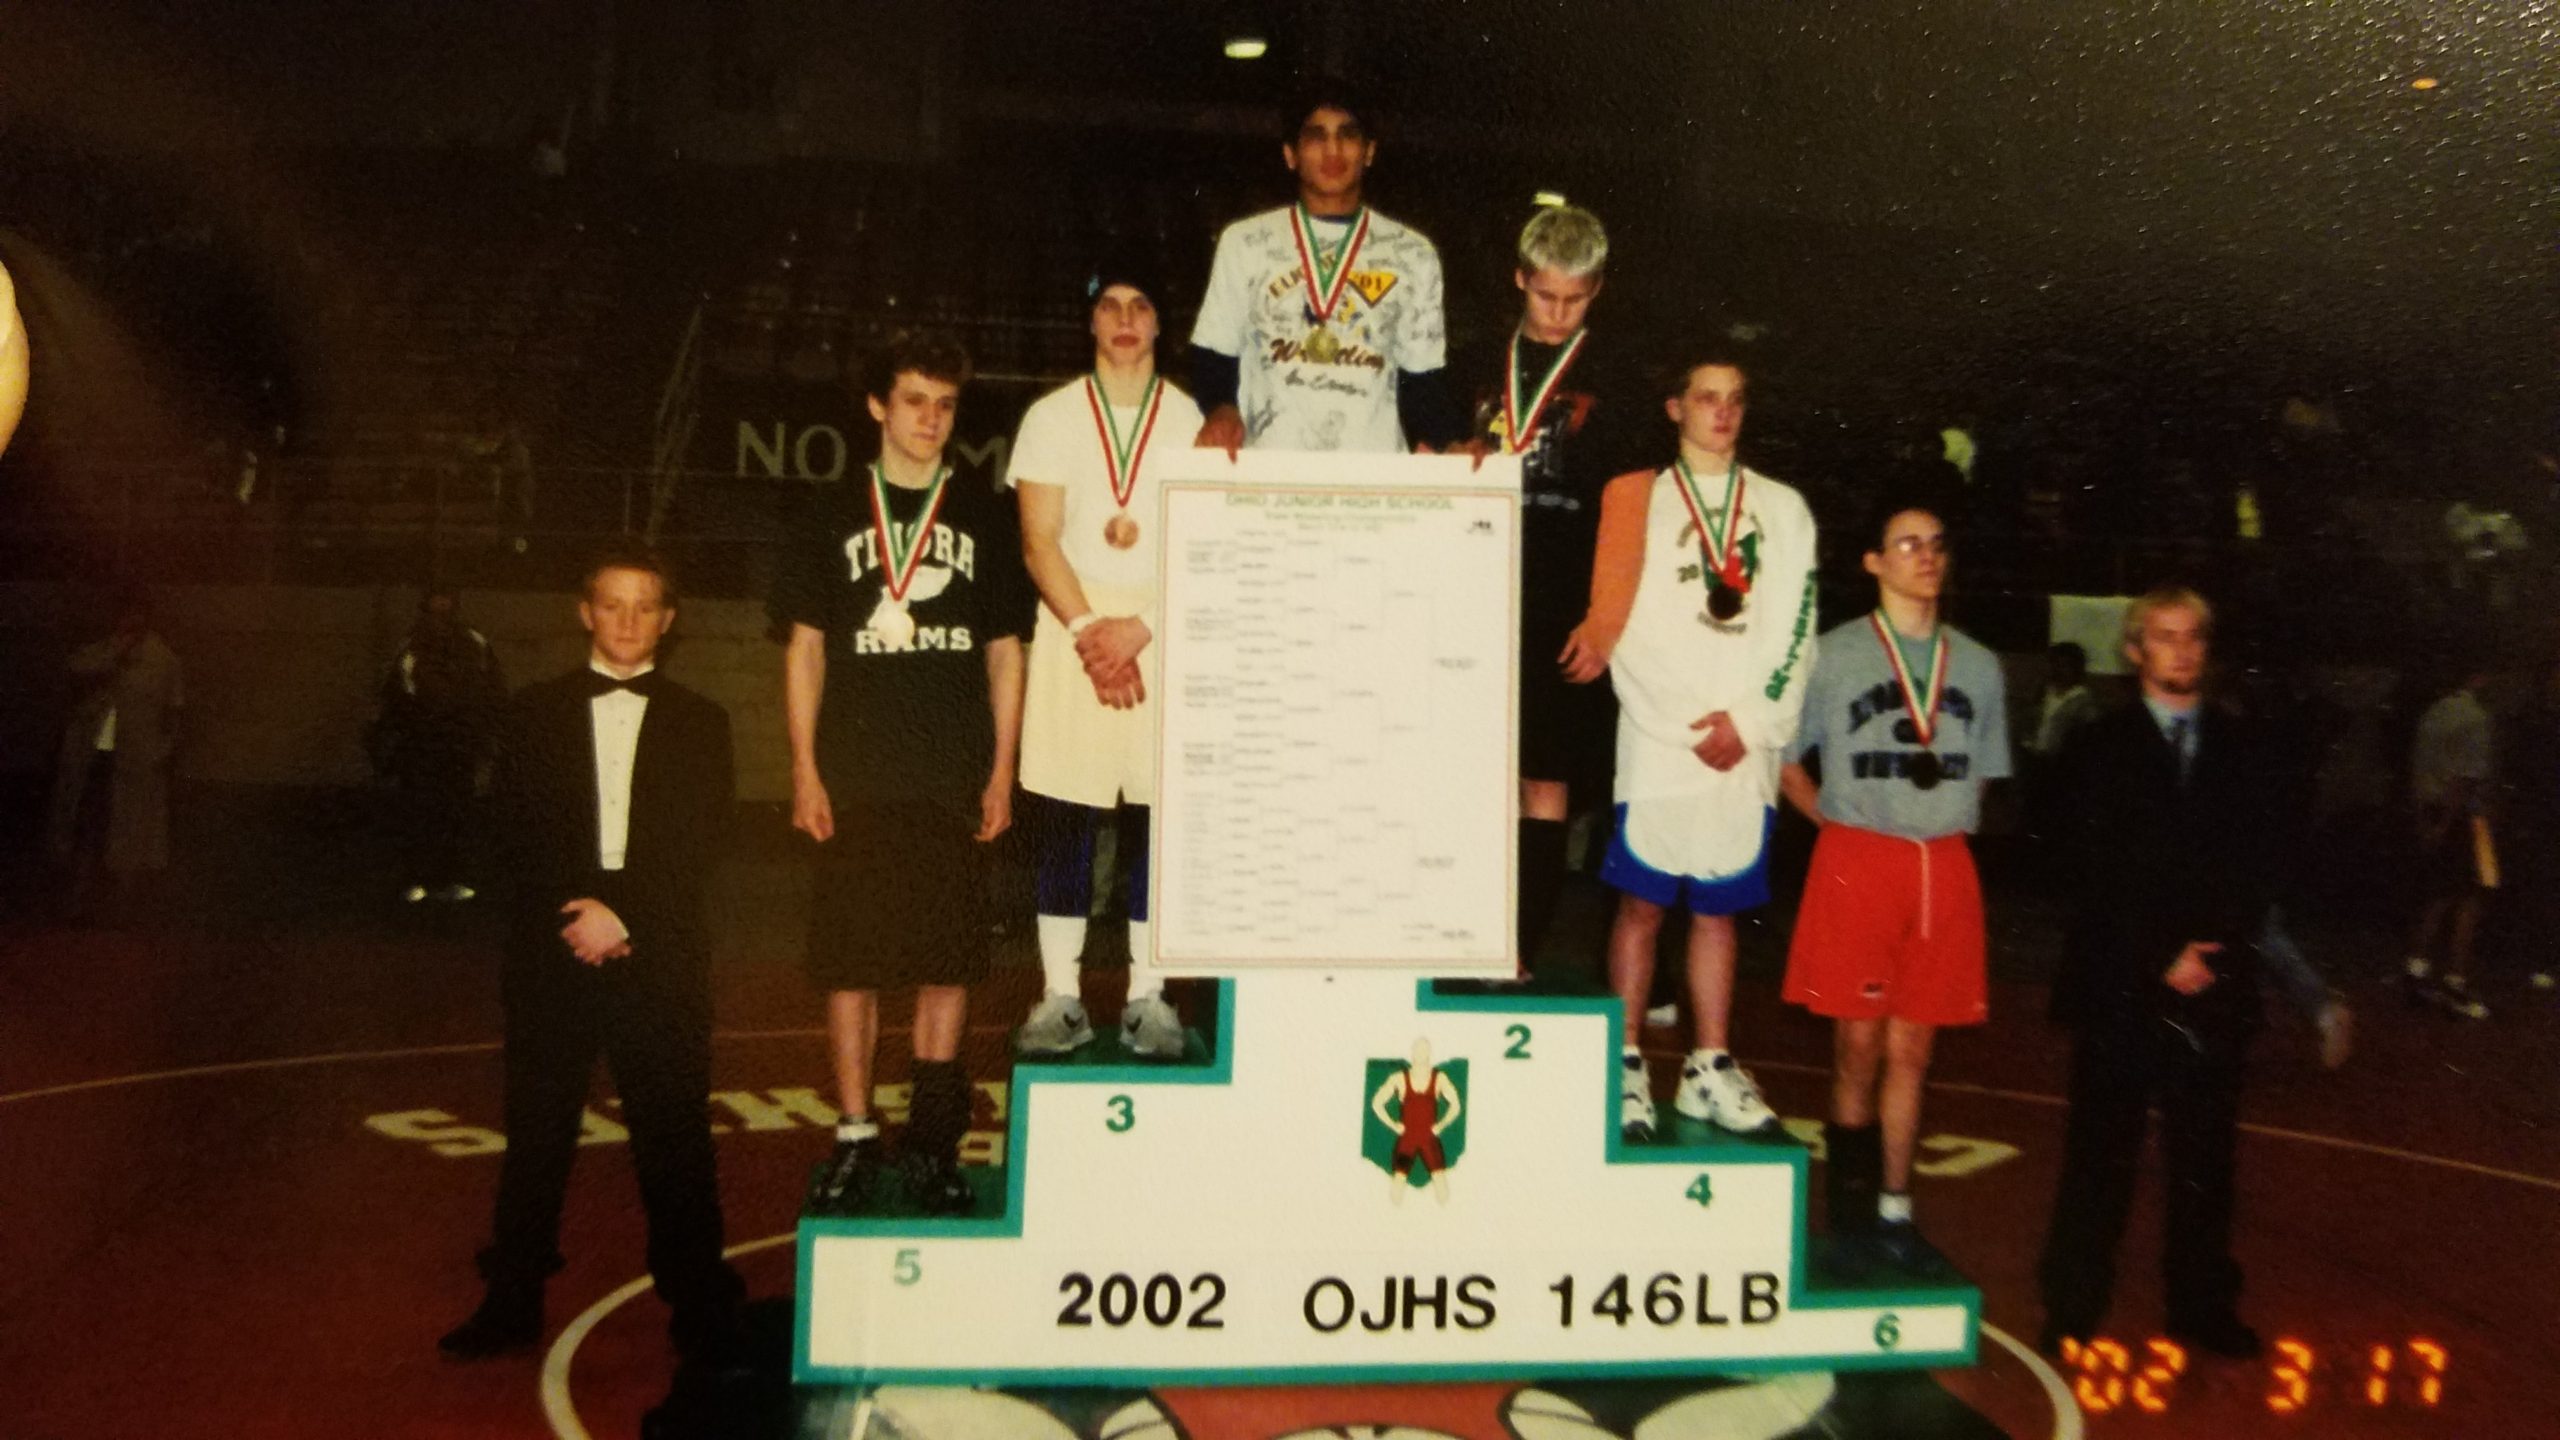 OACLEGENDS “The First” 3X Jr.High State Champion “Tony Tortorici